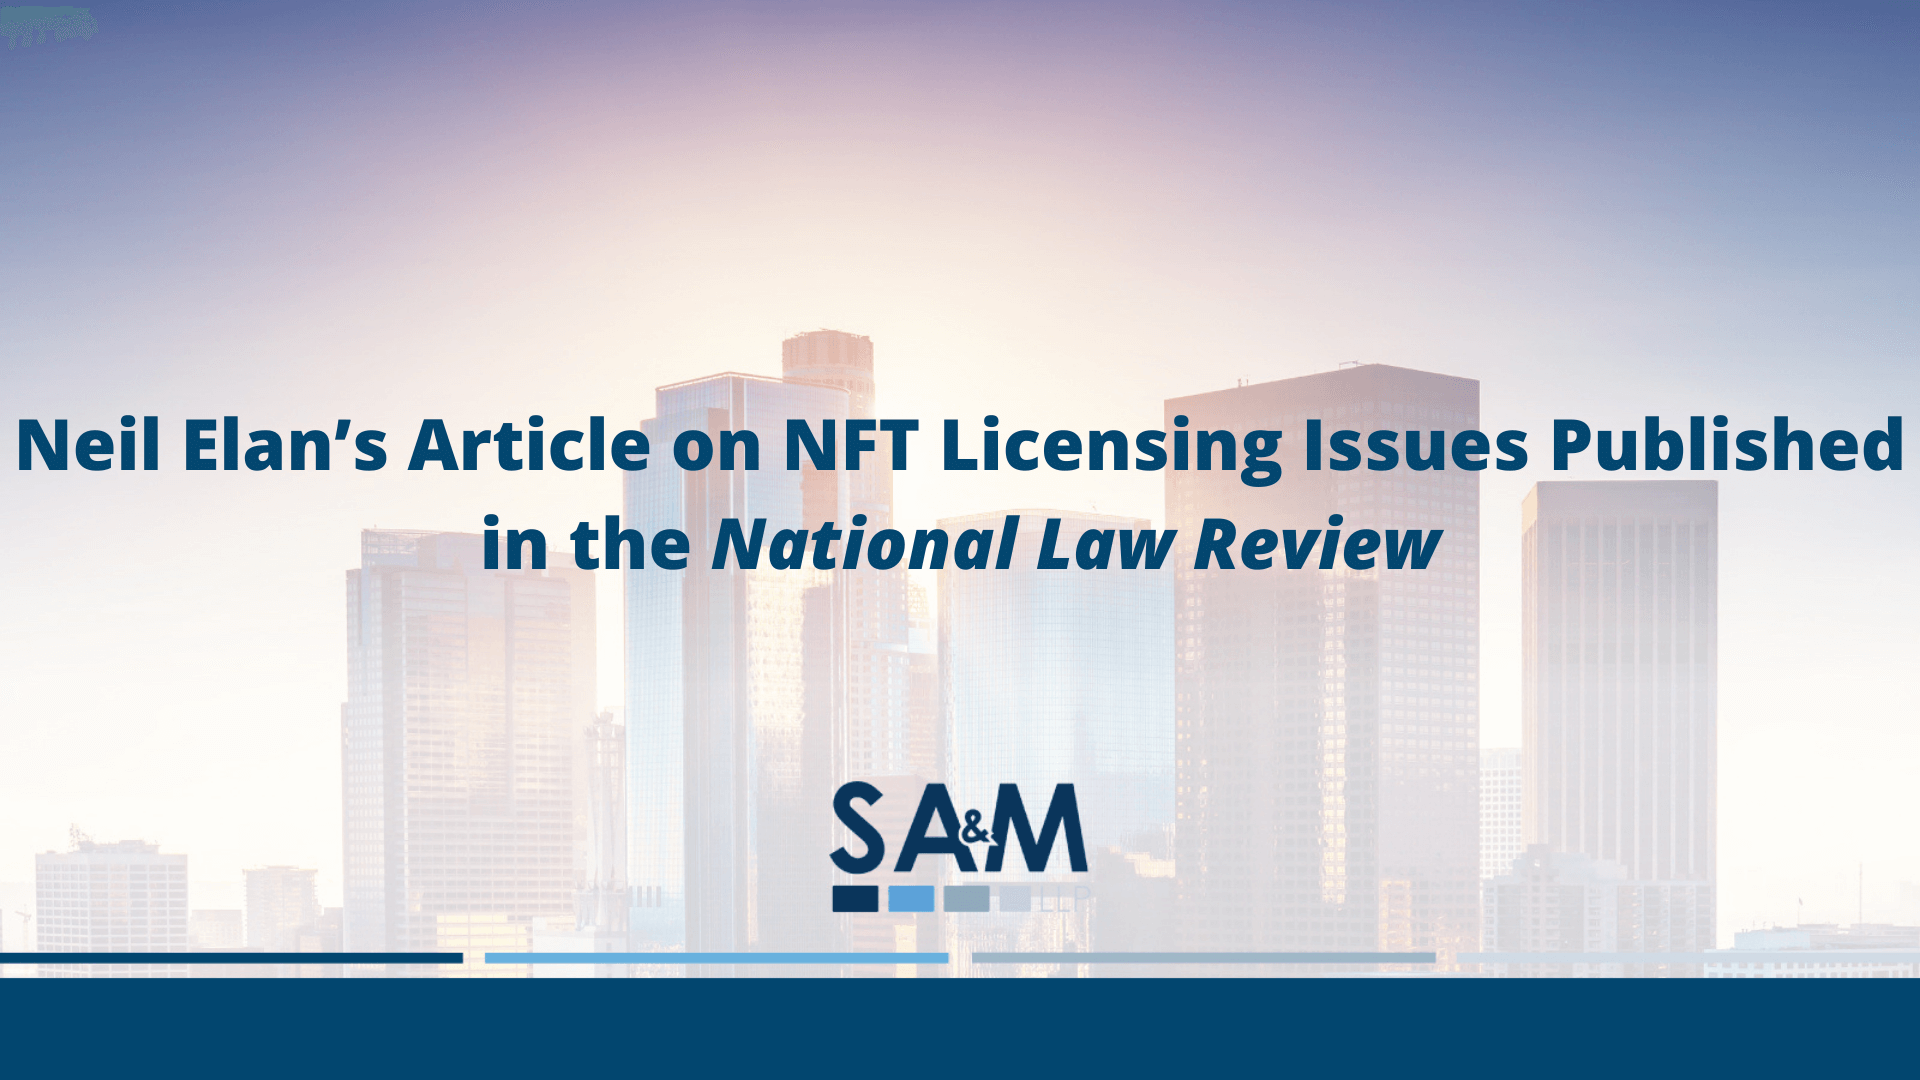 Neil Elan’s Article on NFT Licensing Issues Published in the National Law Review